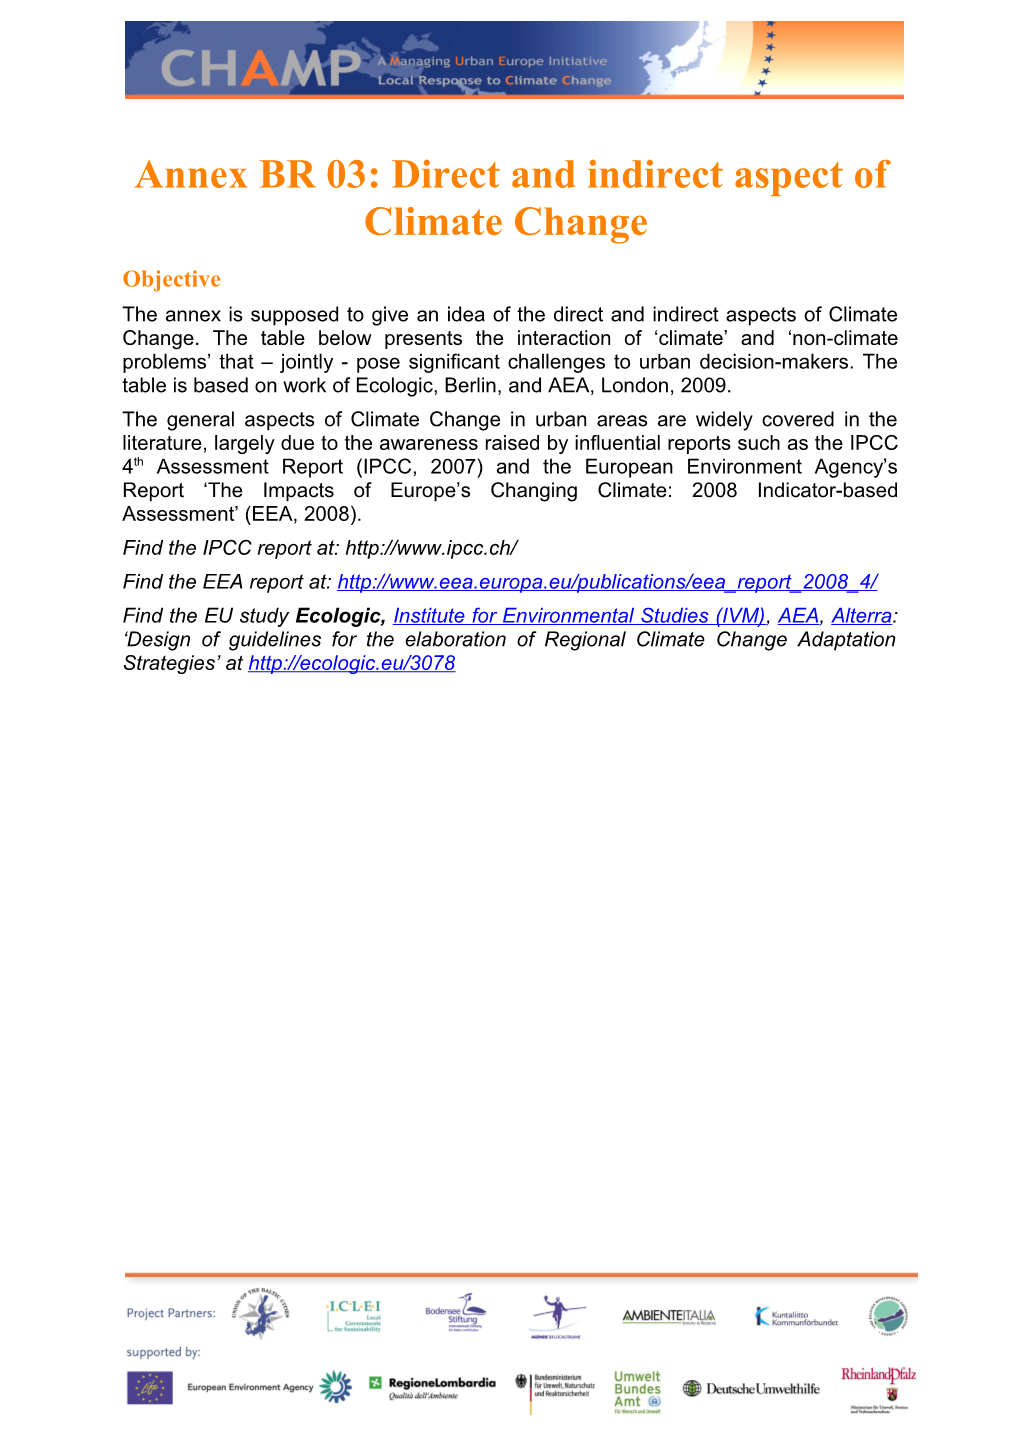 Tool 12: Direct and Indirect Impacts of Climate Change